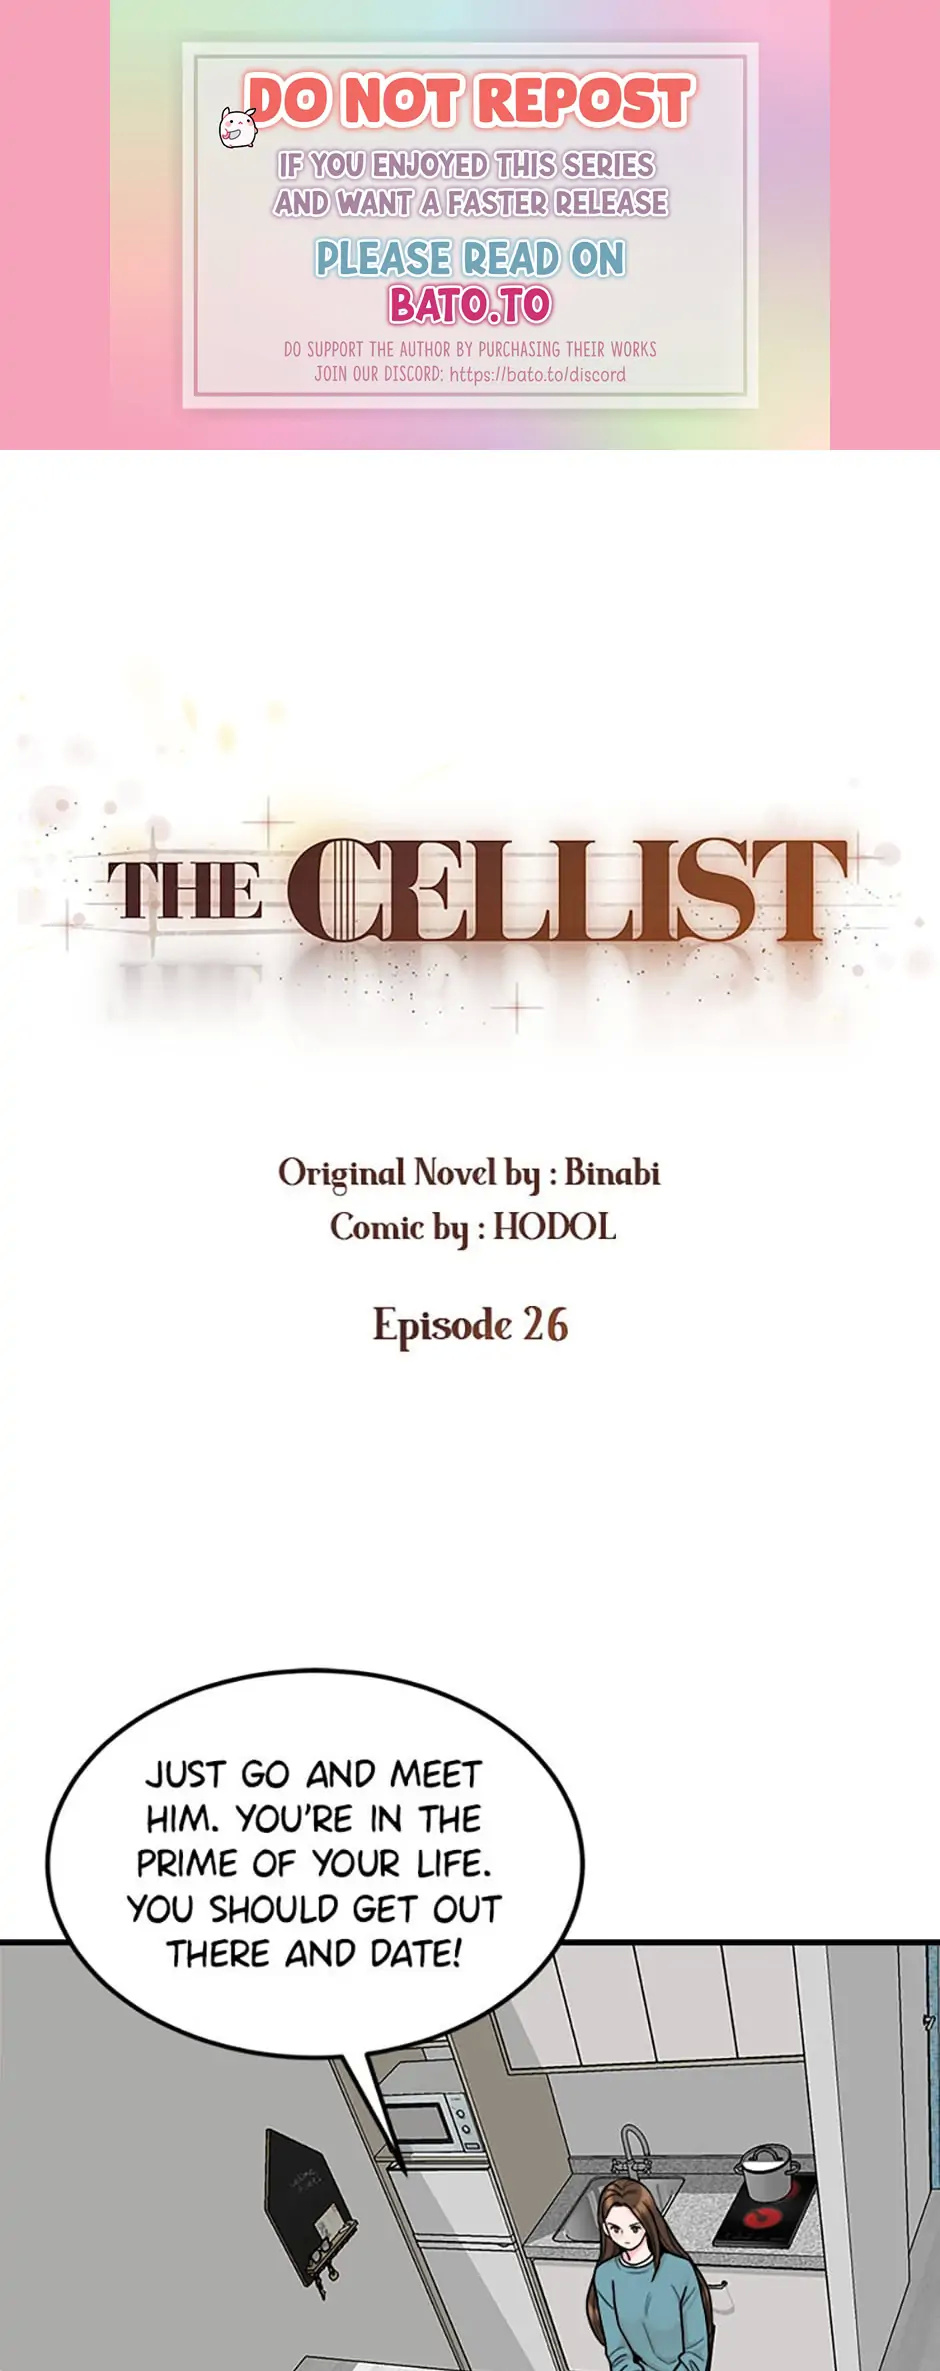 The Cellist - Page 1